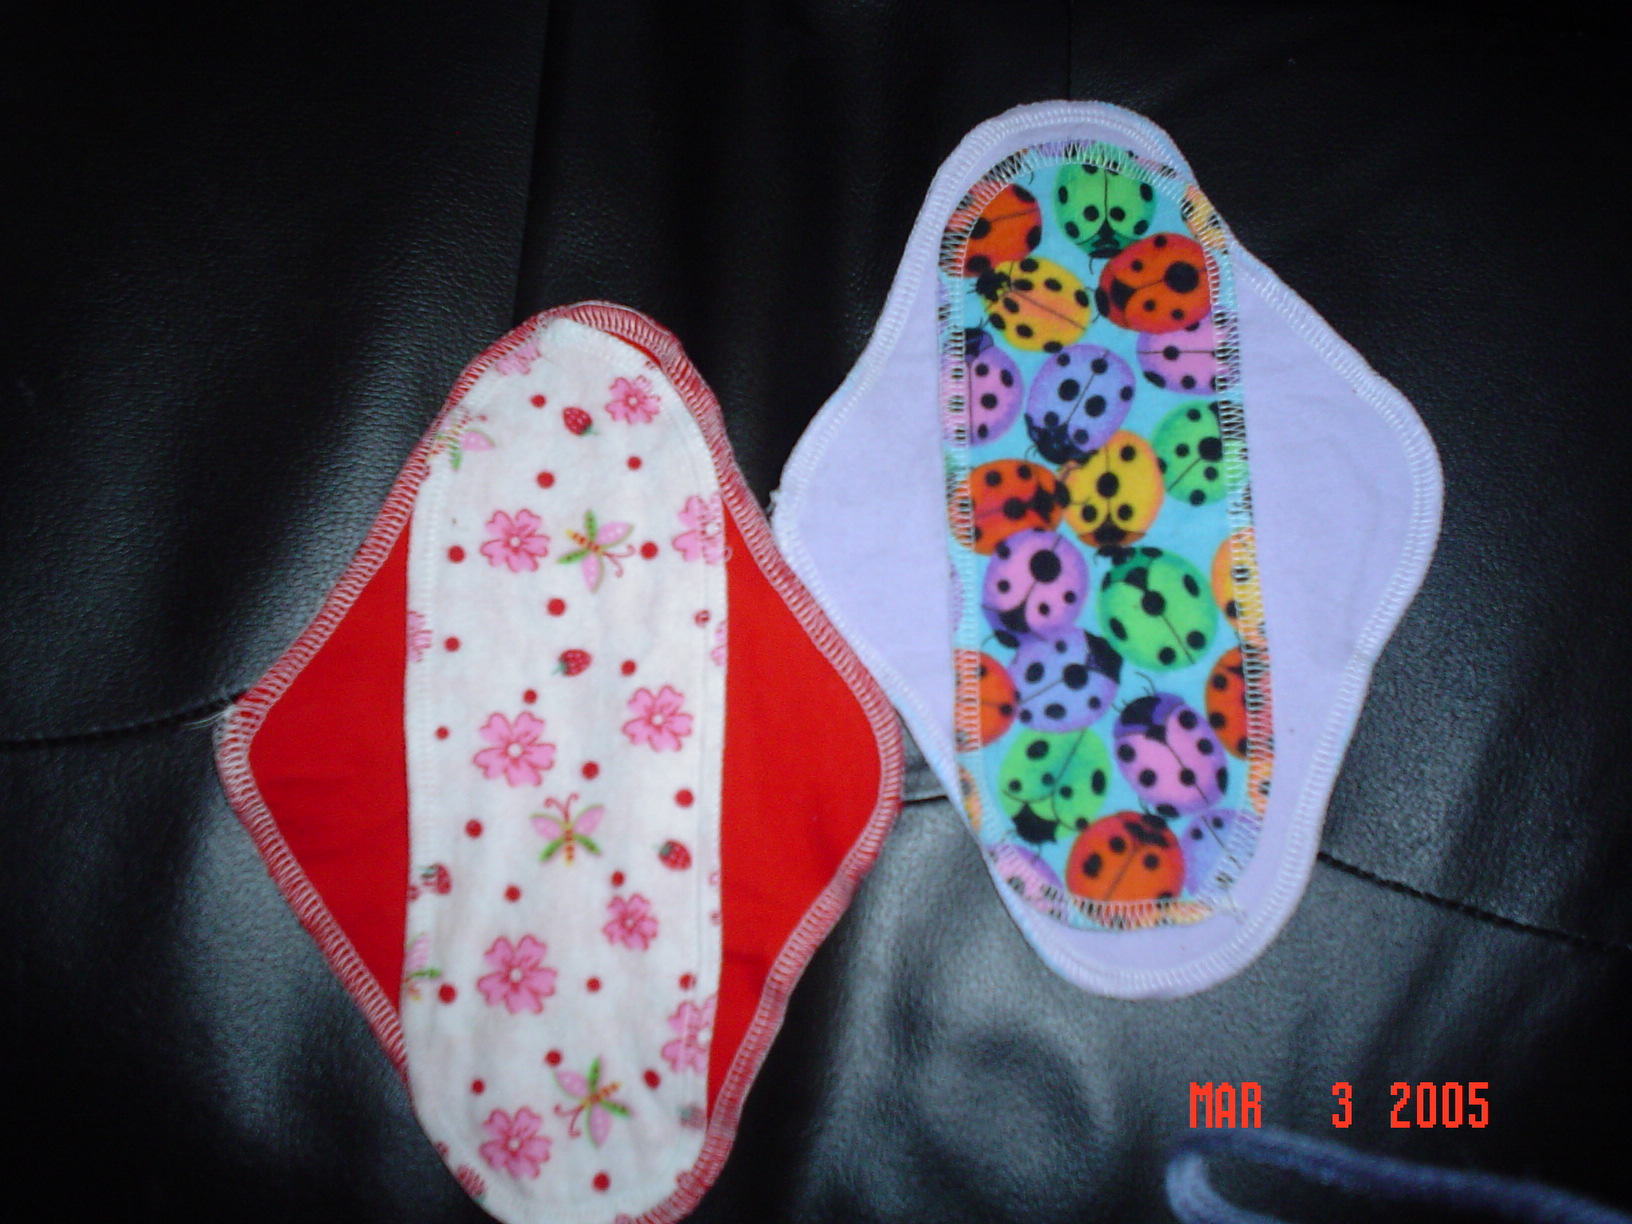 What are reusable menstrual pads?